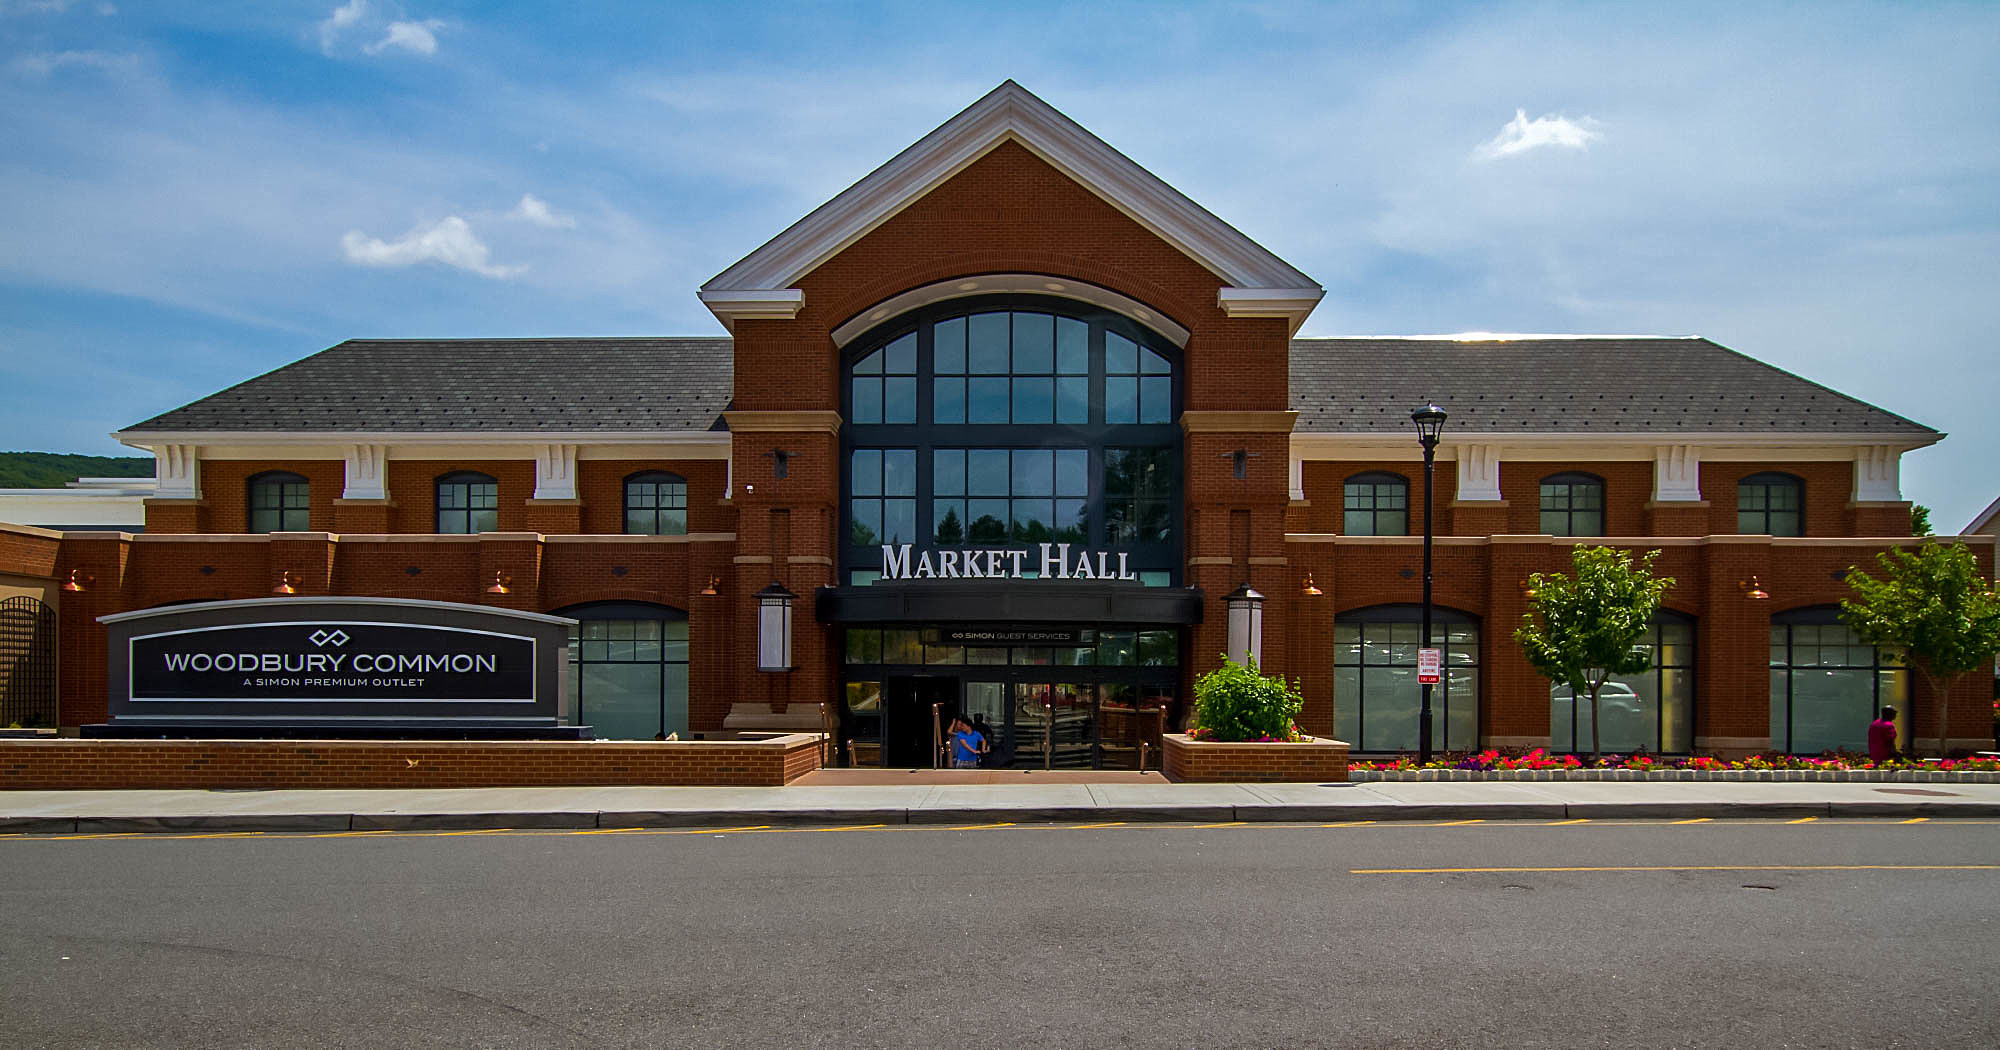 Where to eat near Woodbury Commons outlet mall